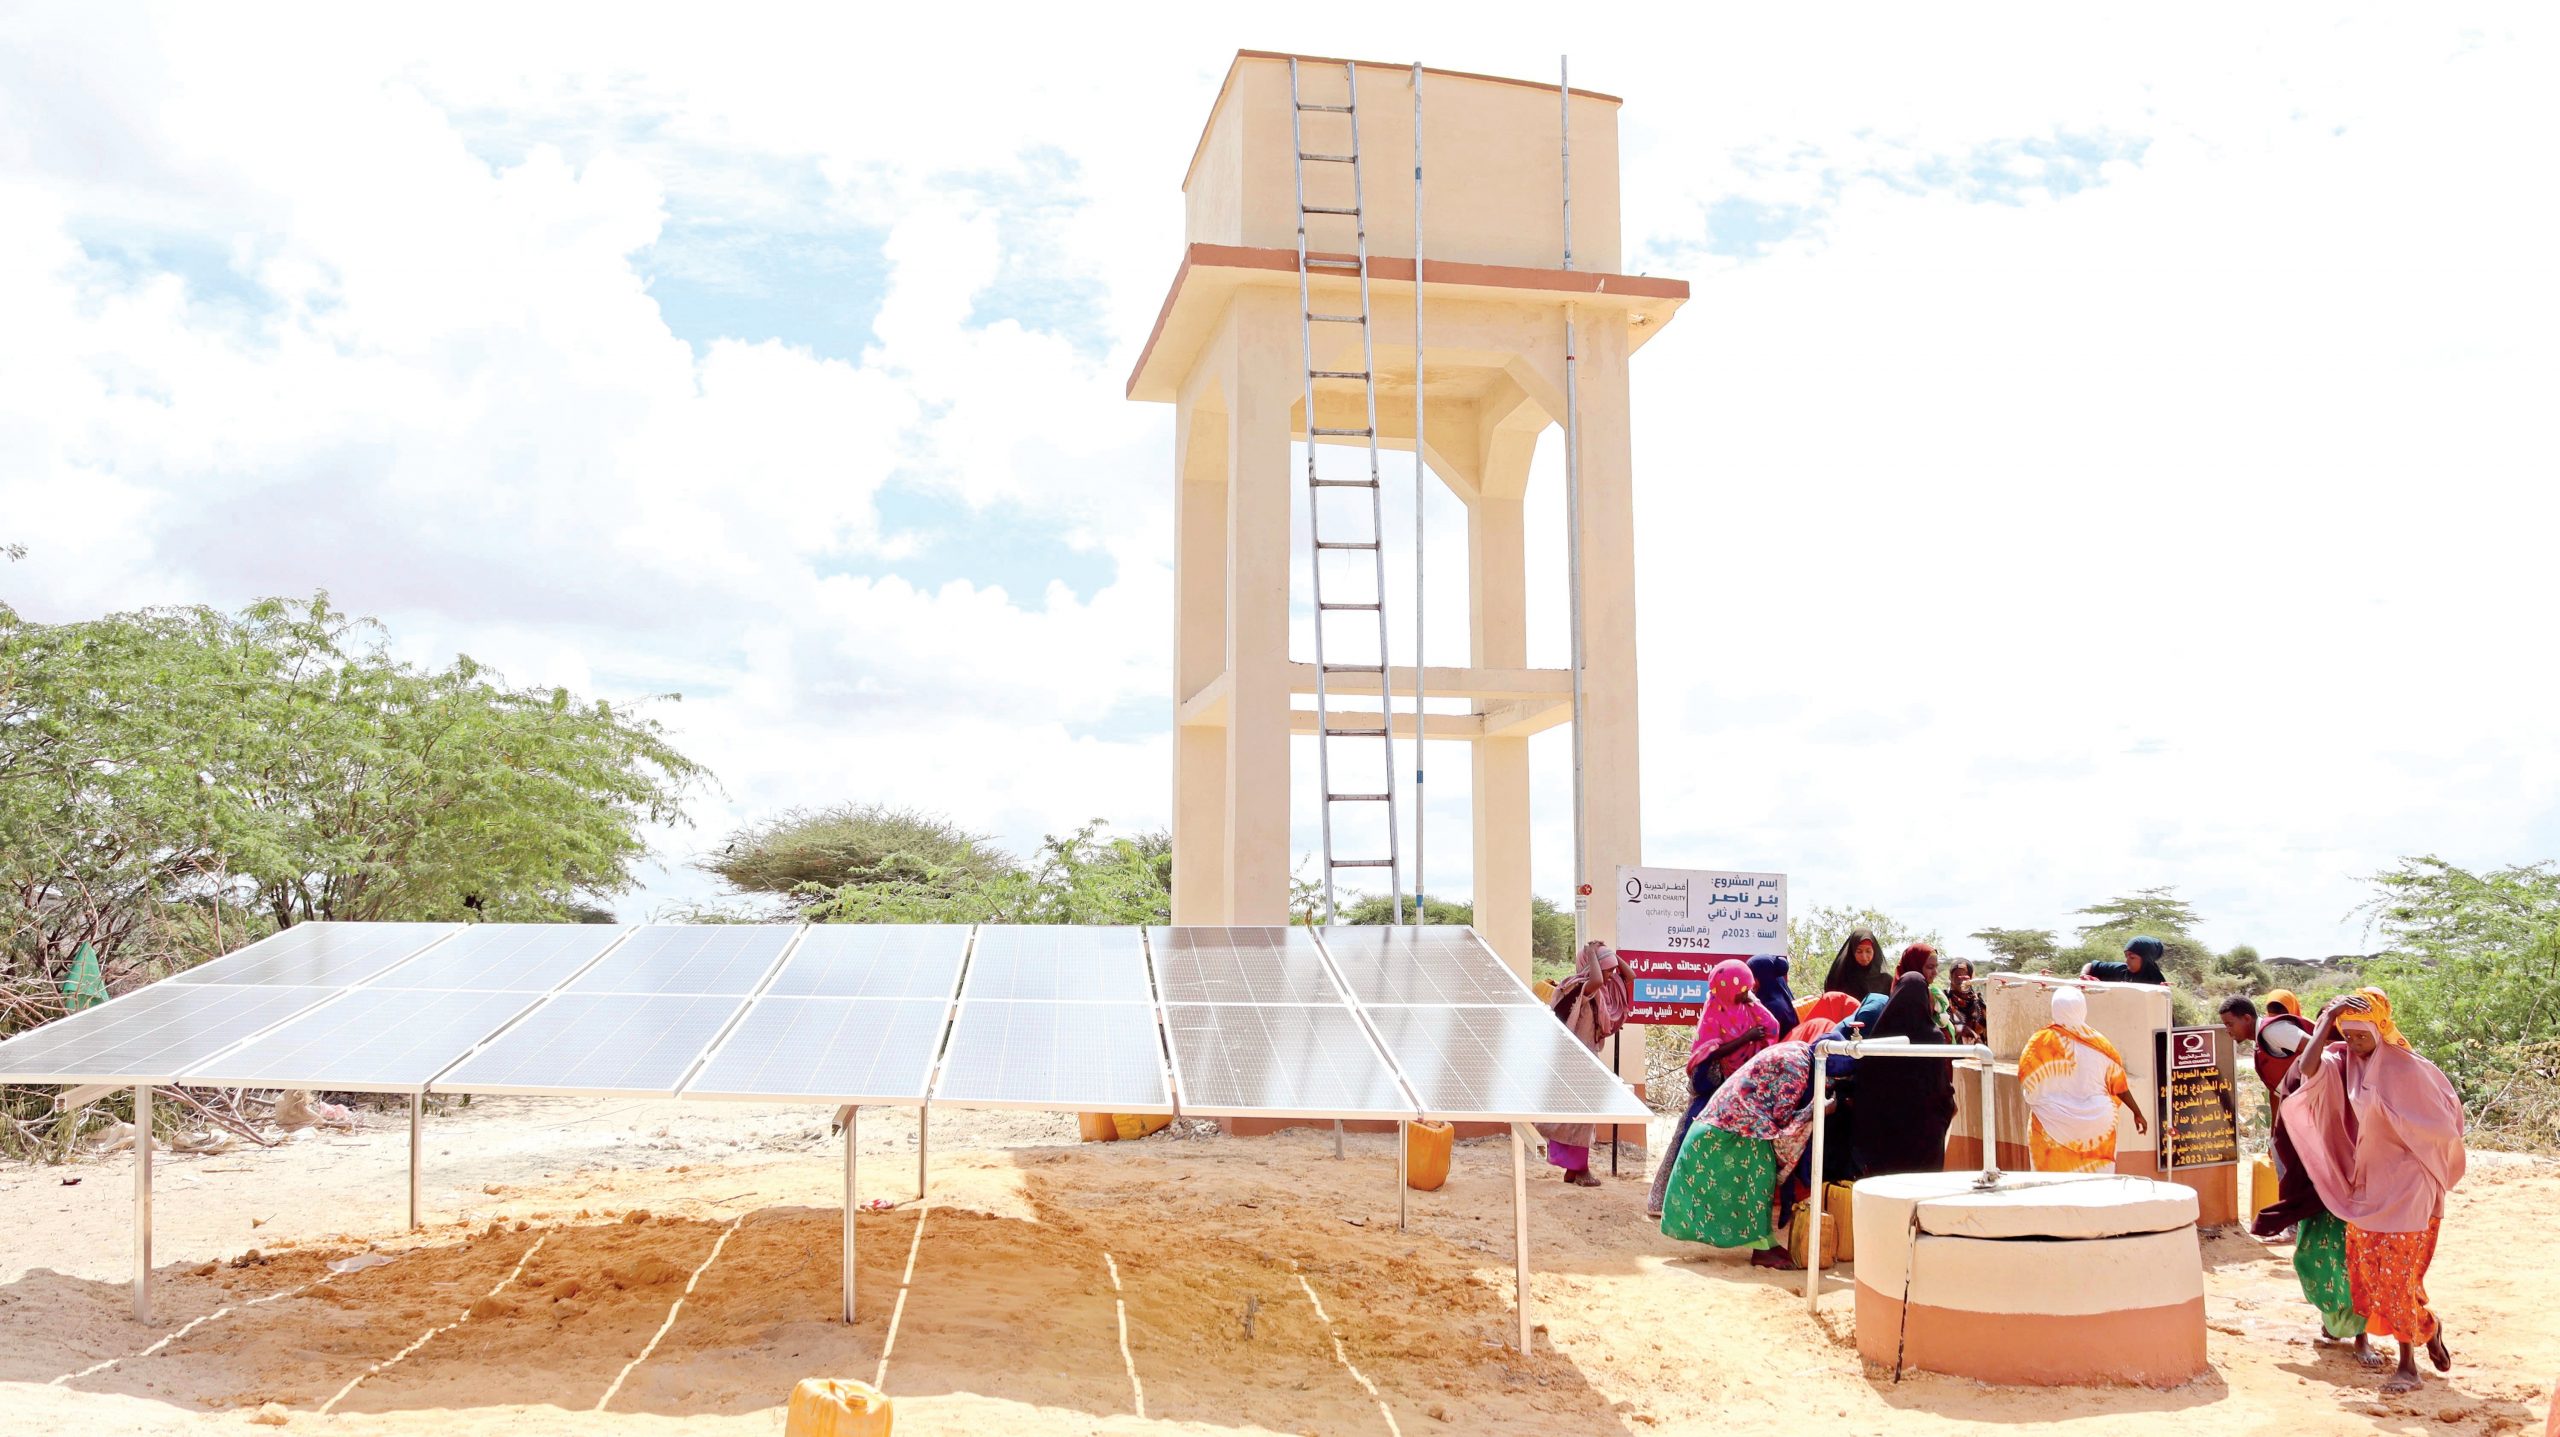 Qatar Charity Implements 50 Water Projects in Somalia